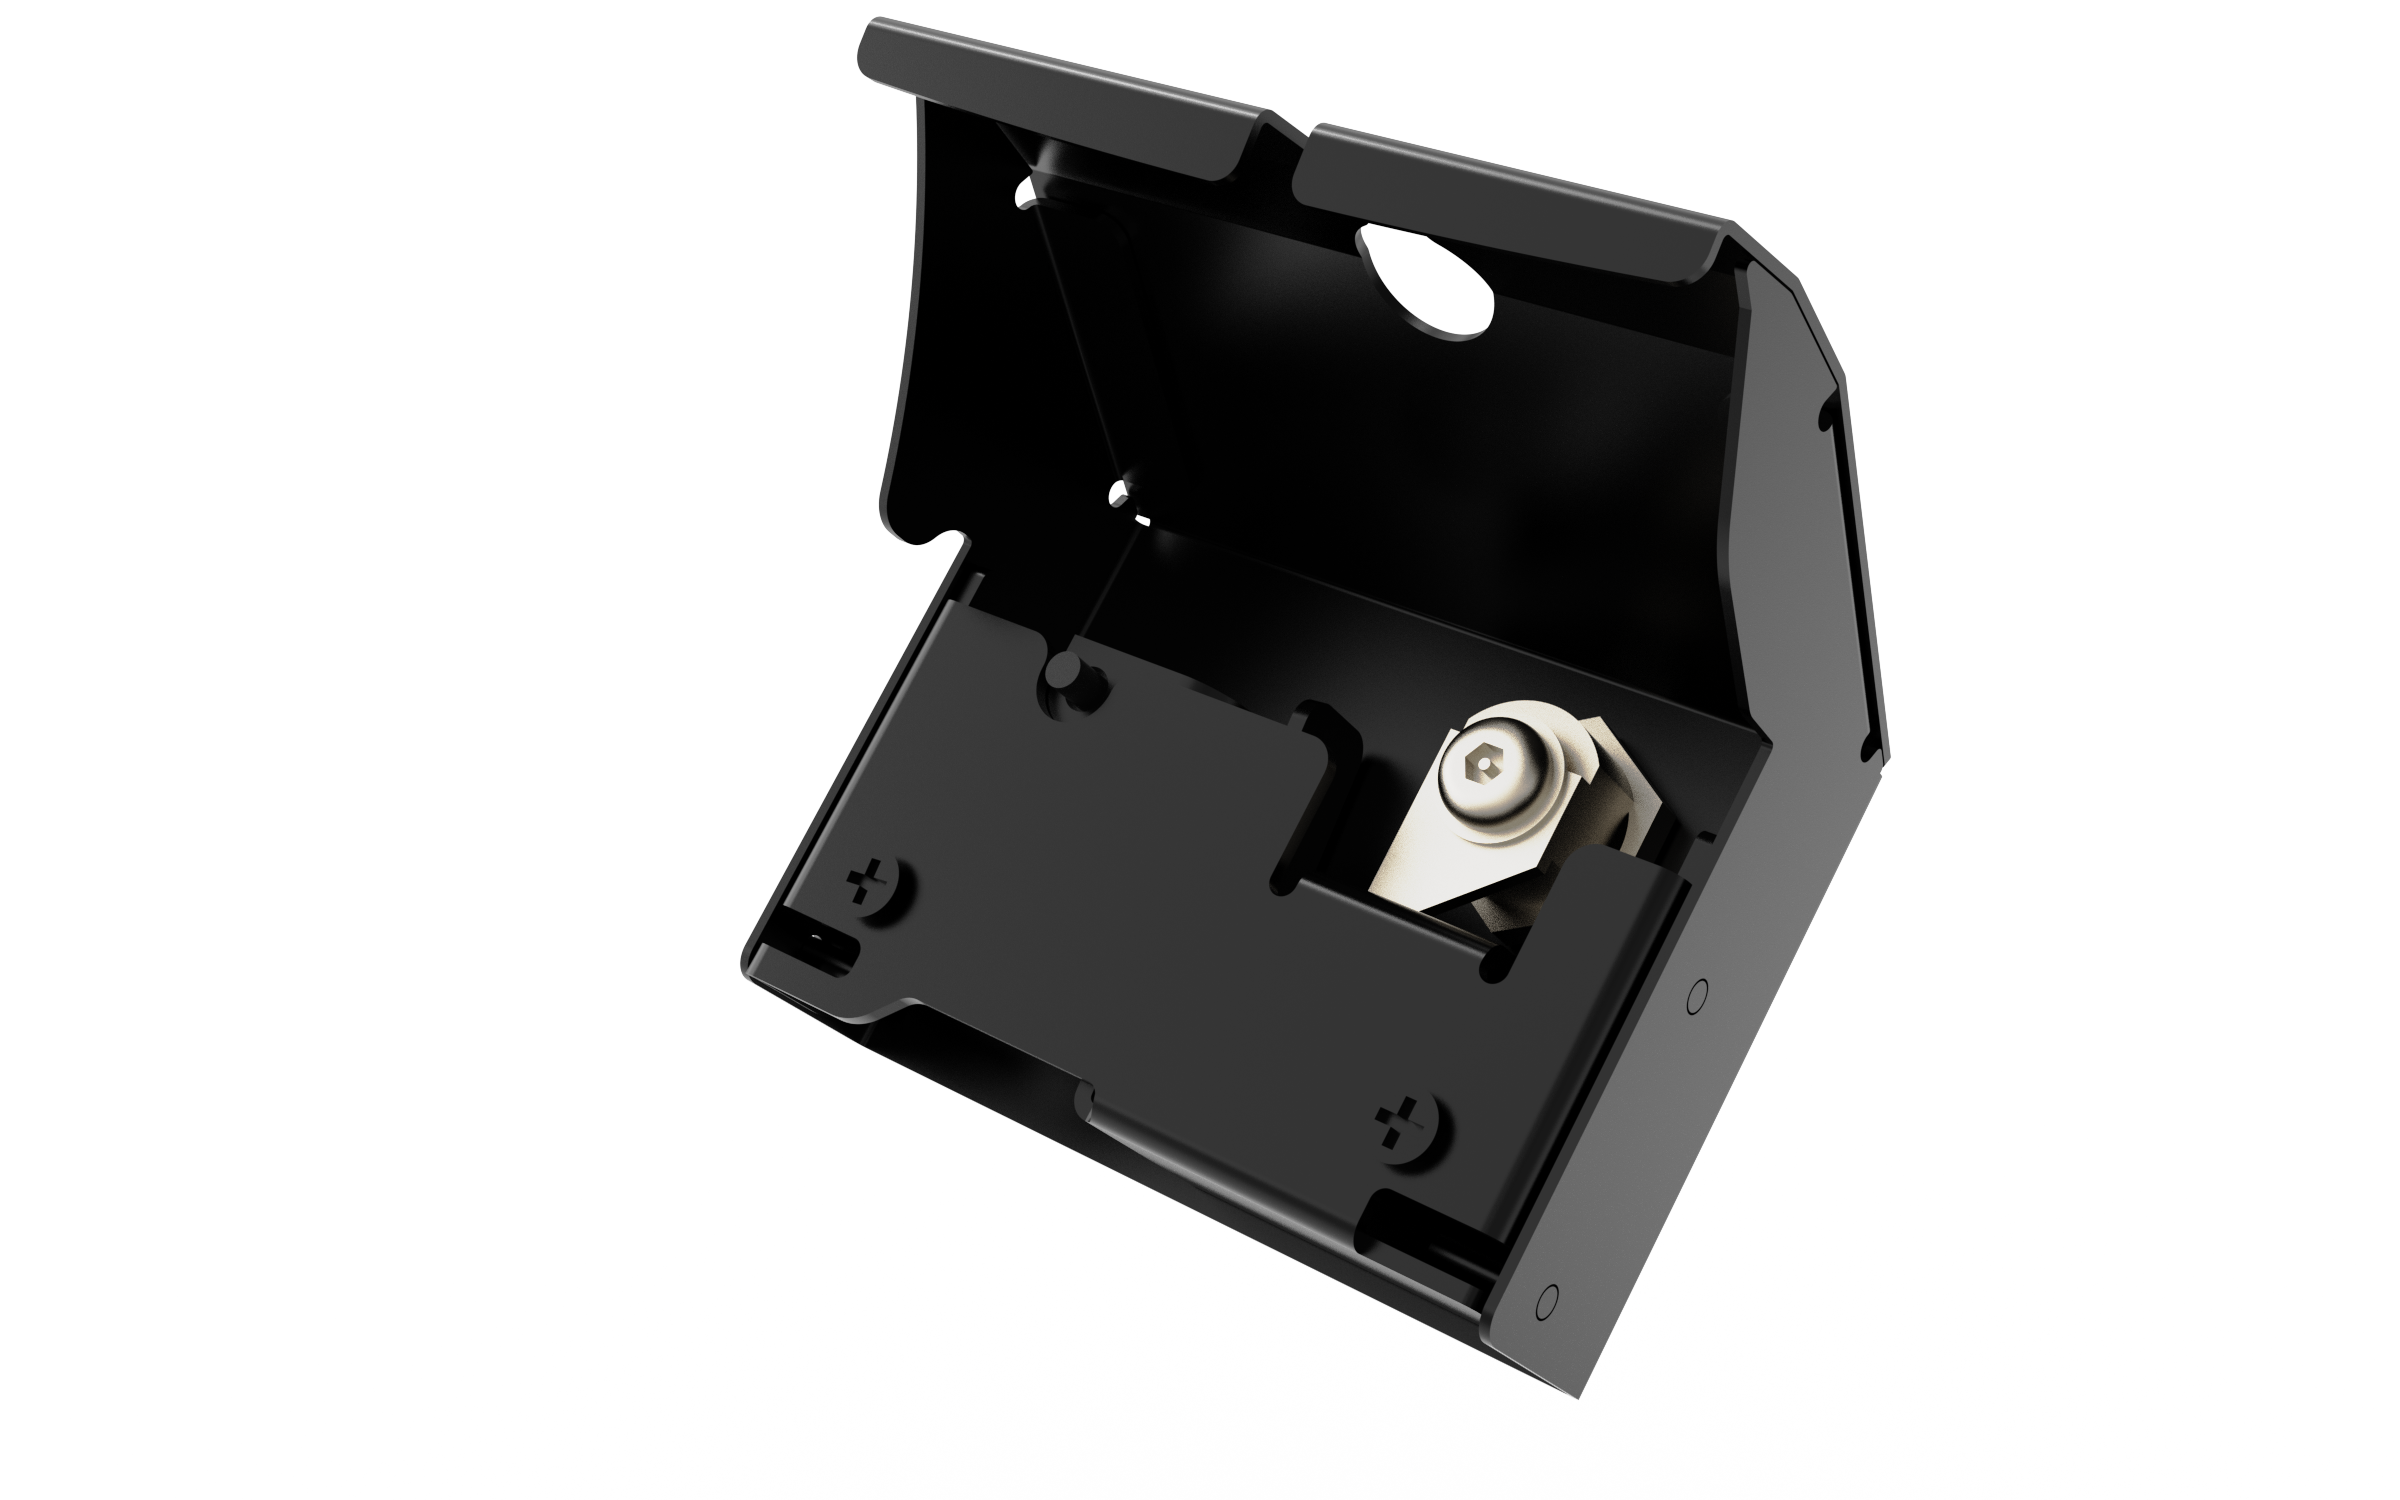 Rear Locking Add-on Kit for Verifone M400 Payment Terminals